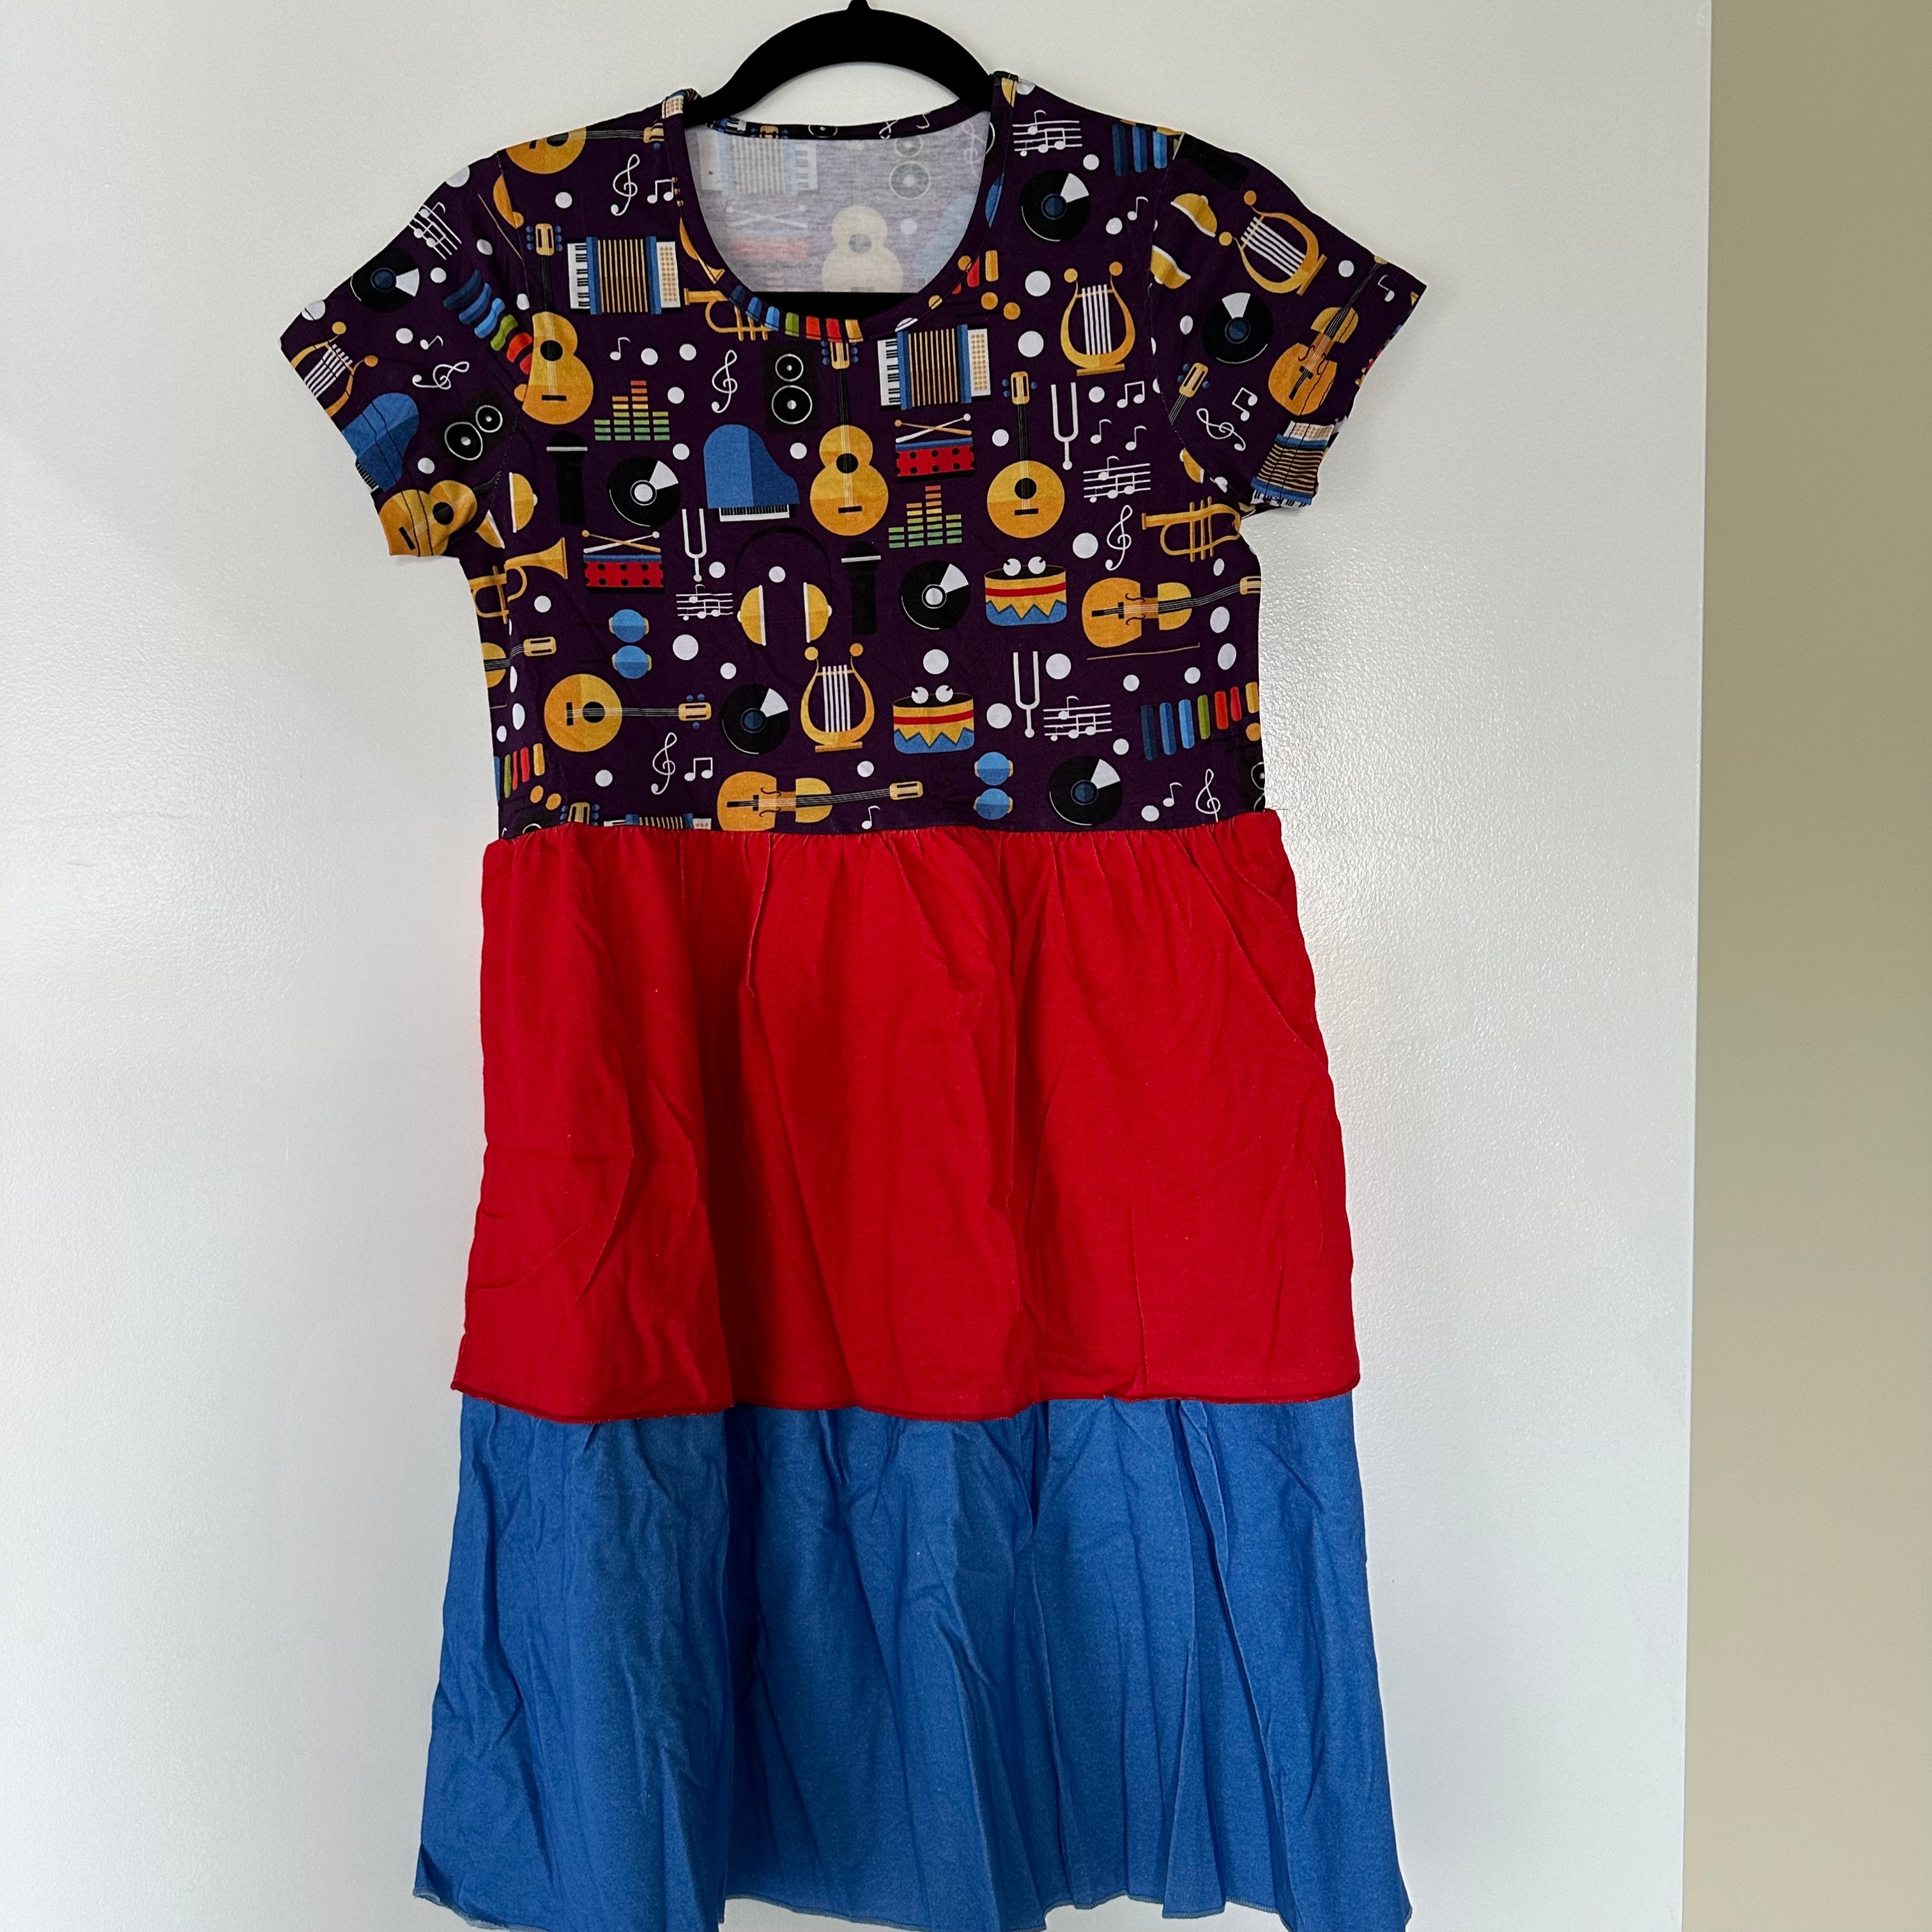 Music Fun Kids Dress Sample (Red and Blue Layers) - 11/12 YEARS